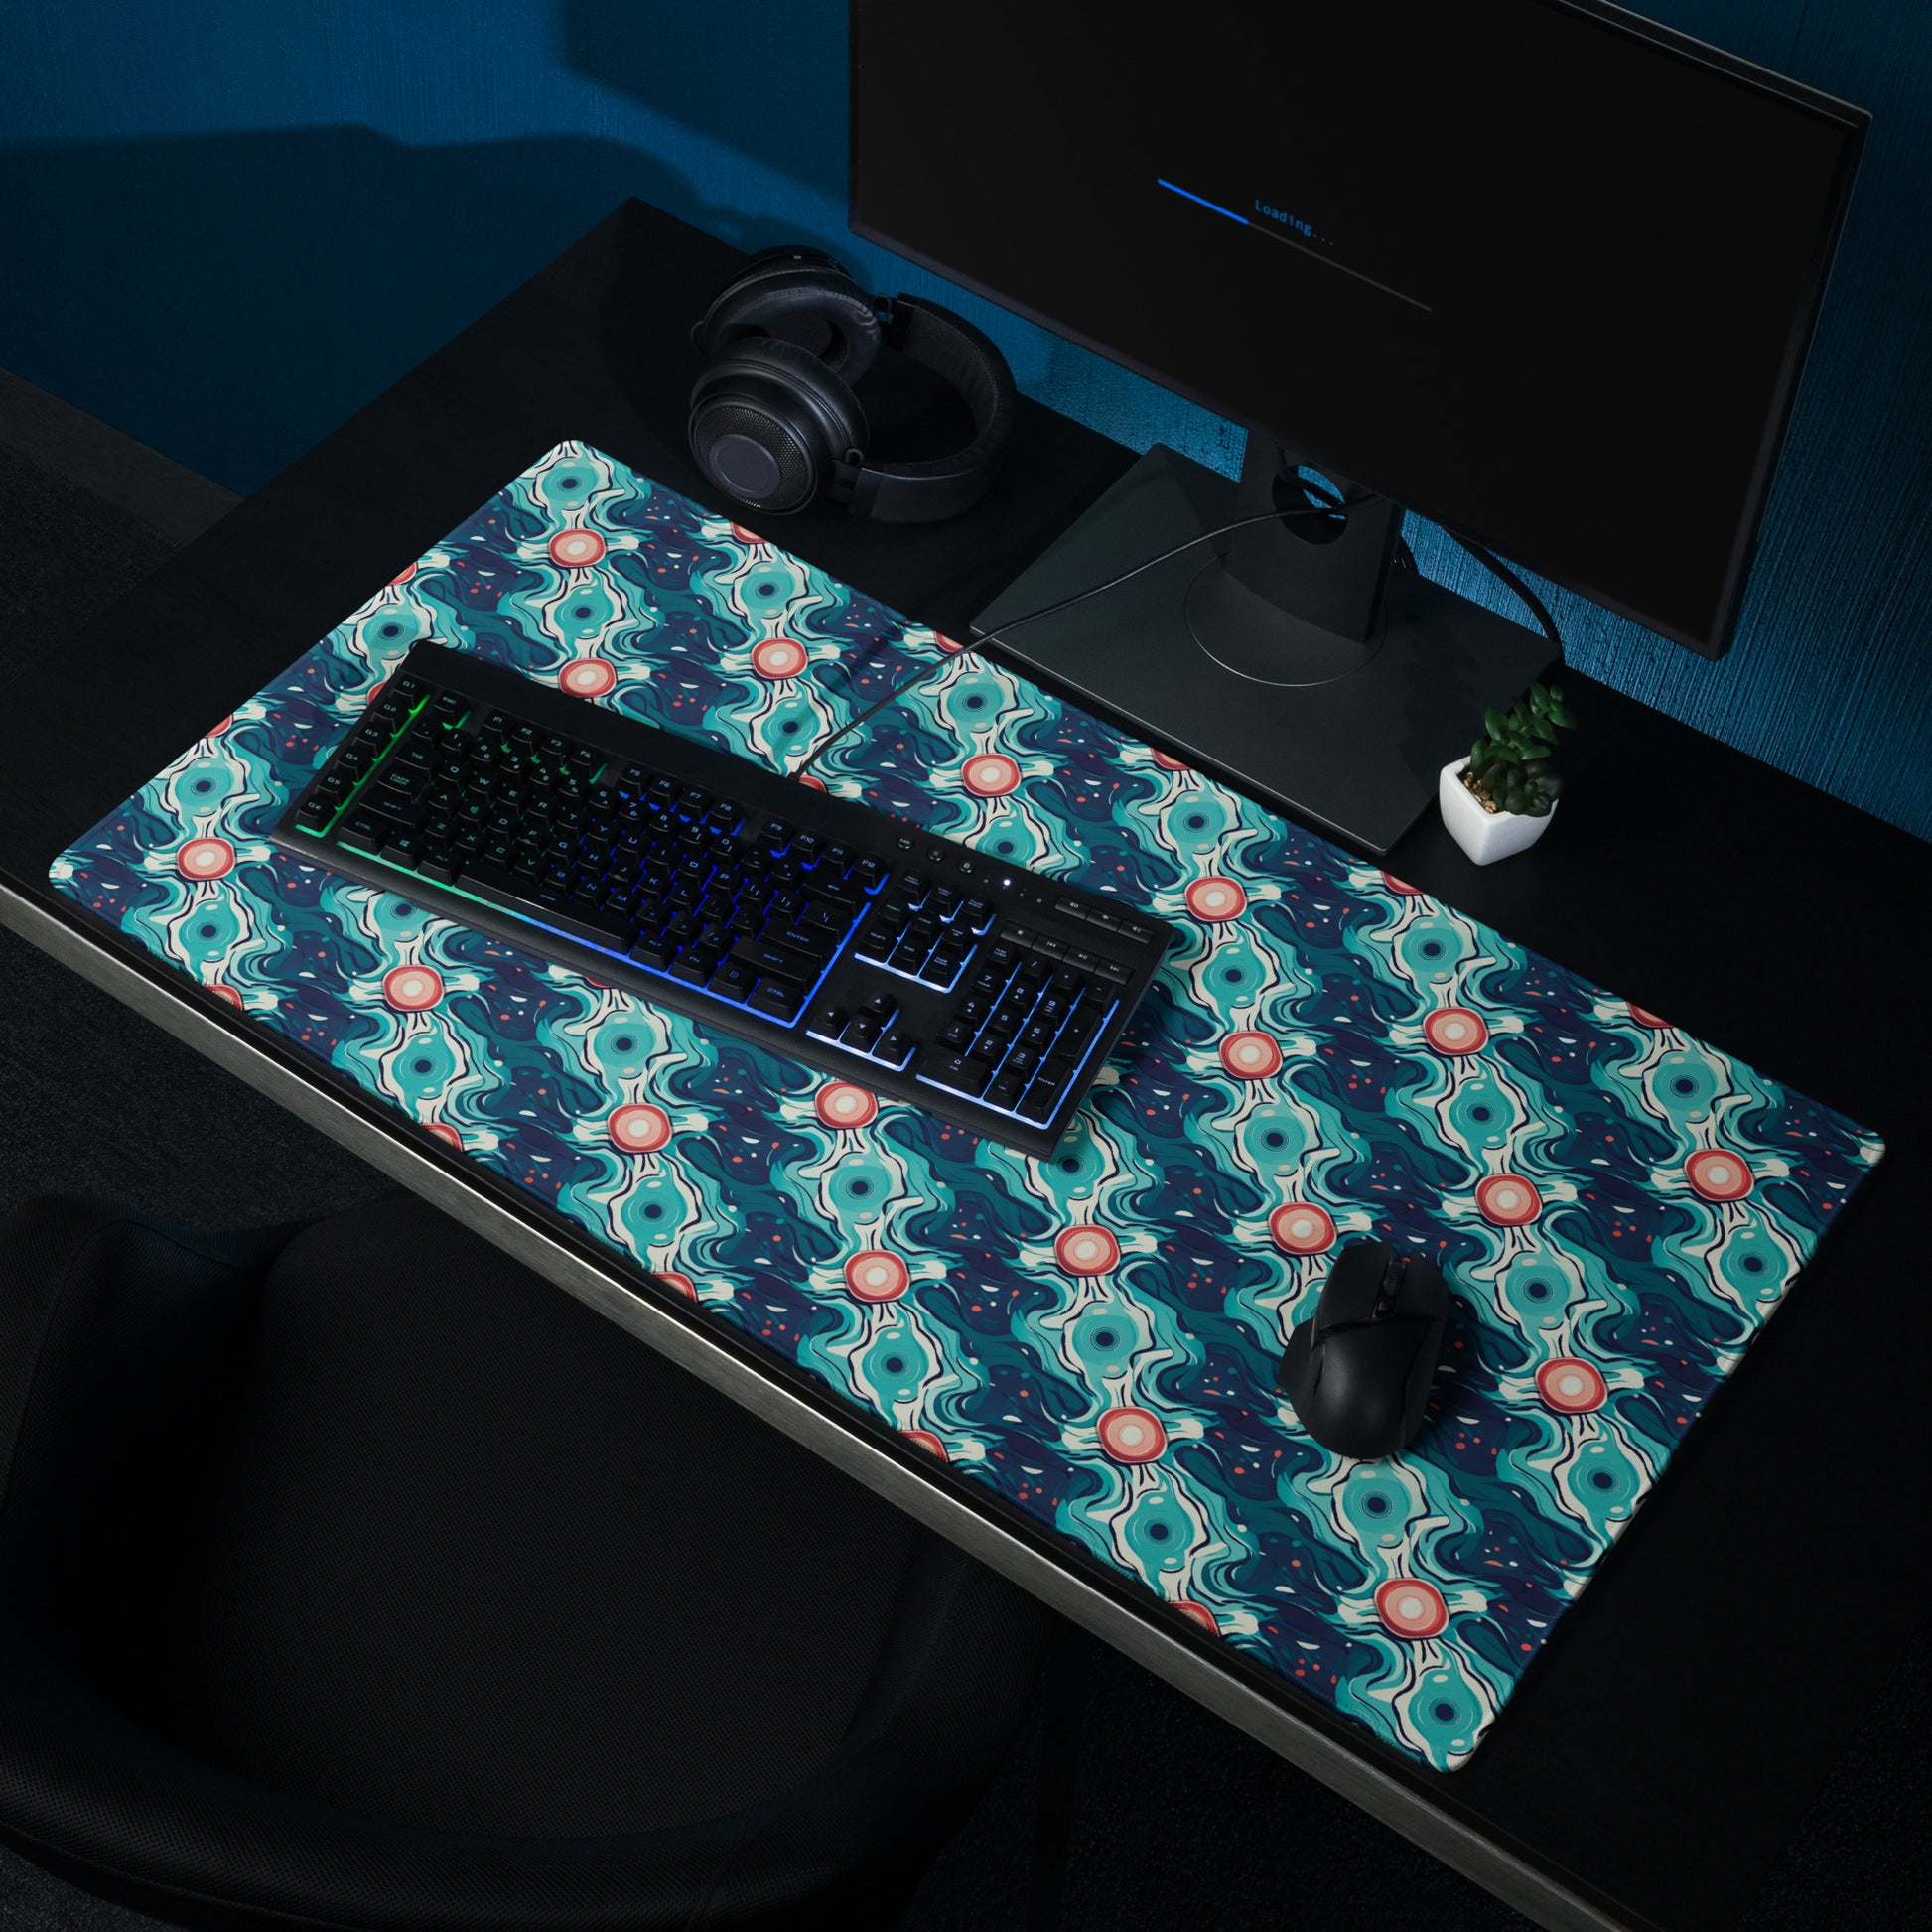 A 36" x 18" desk pad with a teal abstract wavy pattern sitting on a desk.